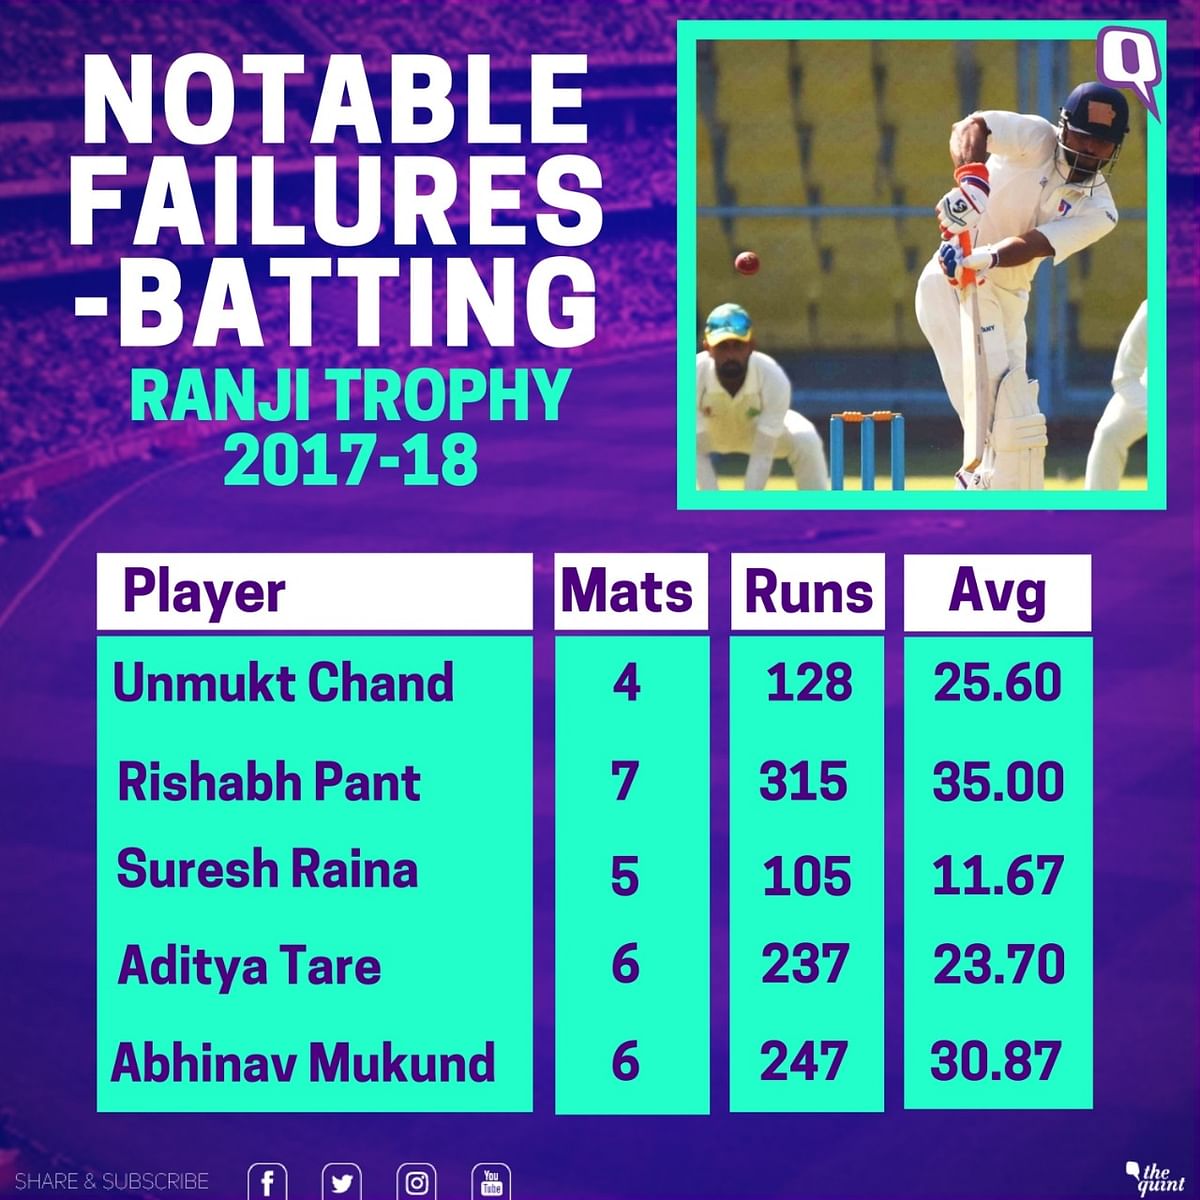 The complete primer on the big performances and disappointing outings of the Ranji Trophy season.